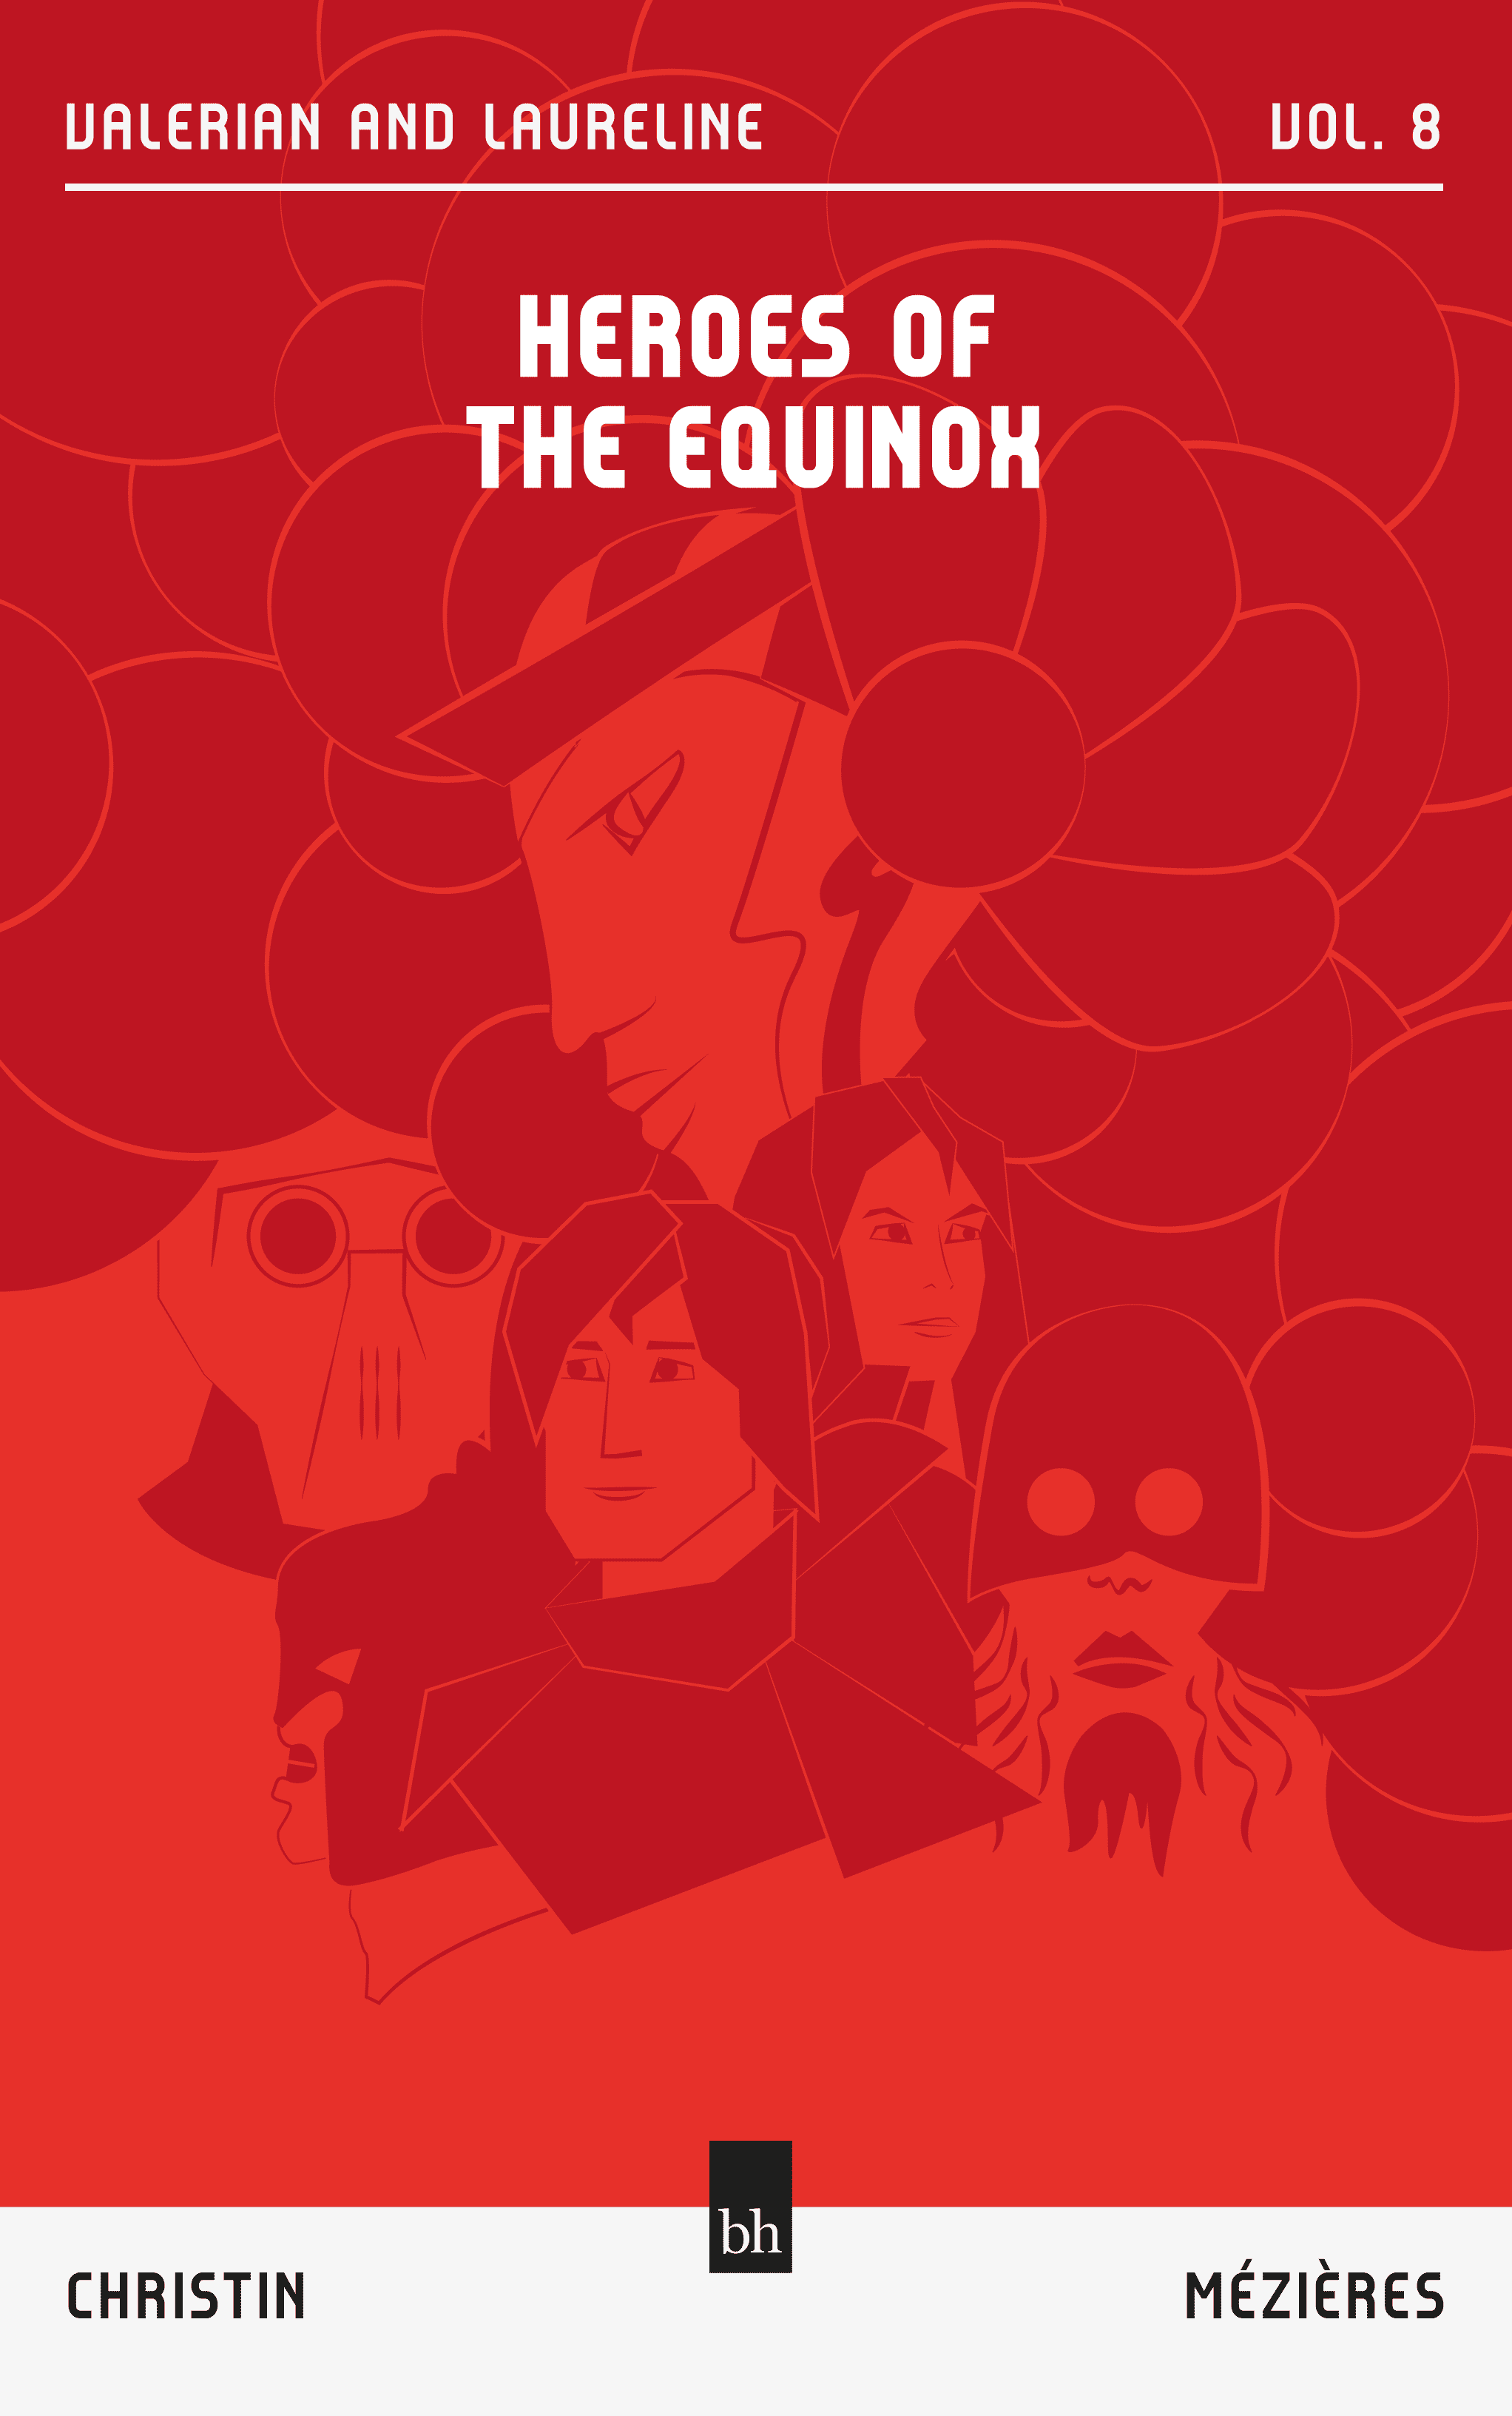 Book cover mock thumbnail for Heroes of The Equinox (Valerian and Laureline Vol. 8)